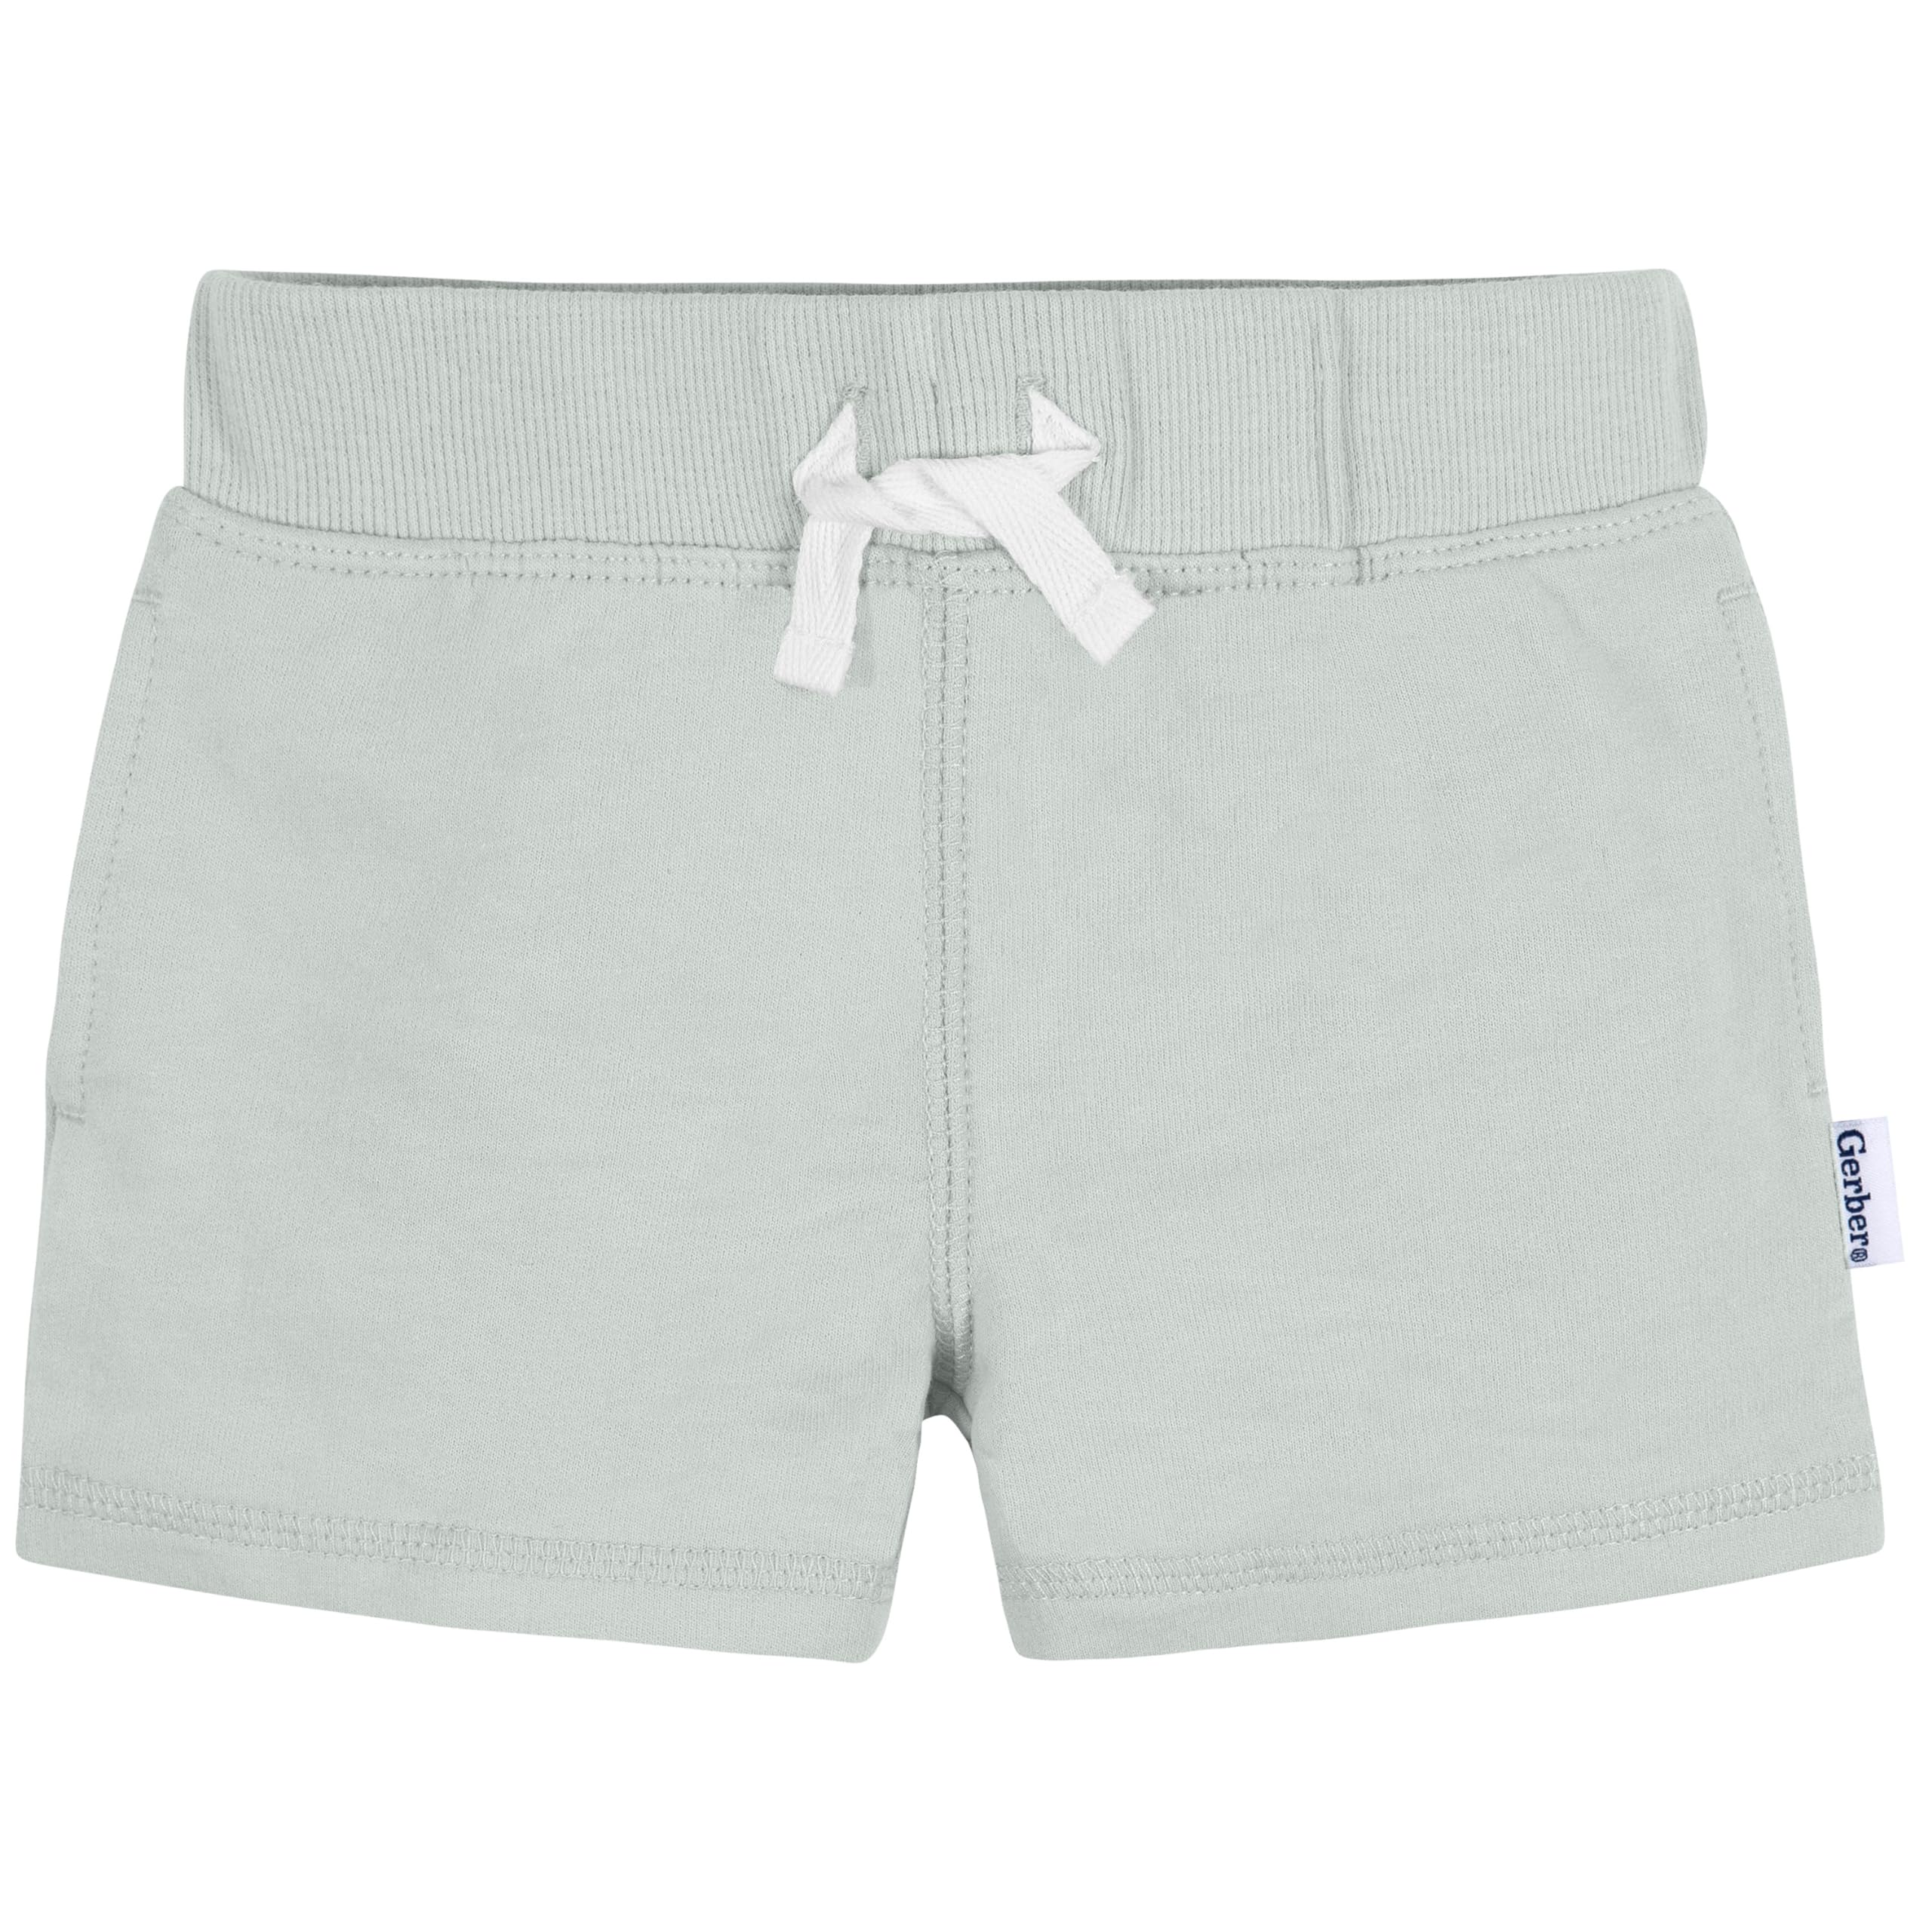 Gerber Baby Boys' Toddler 3-Pack Pull-on Knit Shorts